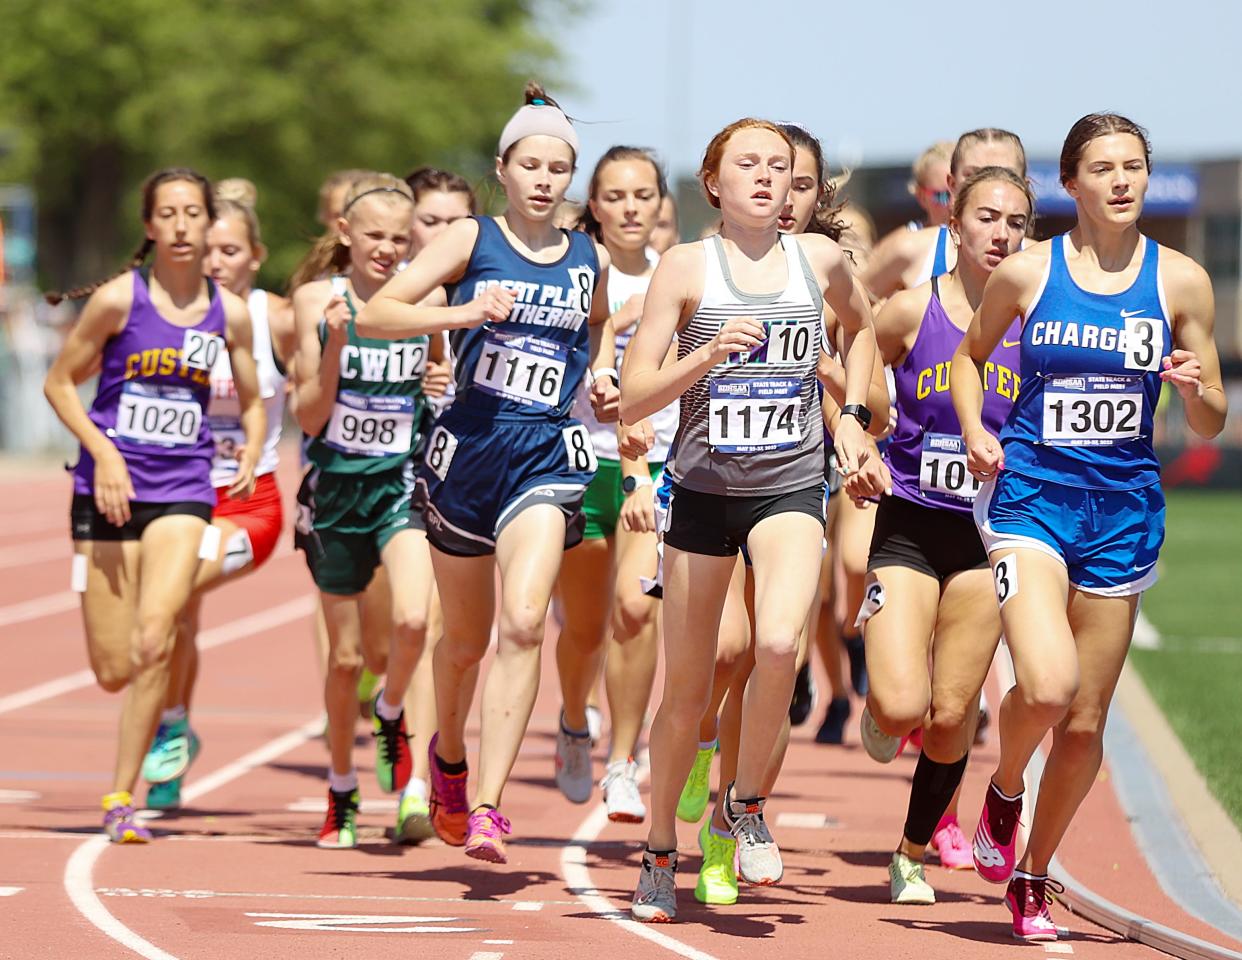 Halle Bauer of Great Plains Lutheran (1116) placed in the Class A girls' 800, 1,600 and 3,200-meter runs during the 2023 South Dakota State High School Track and Field Championships that concluded on Saturday, May 27 at Howard Wood Field in Sioux Falls.